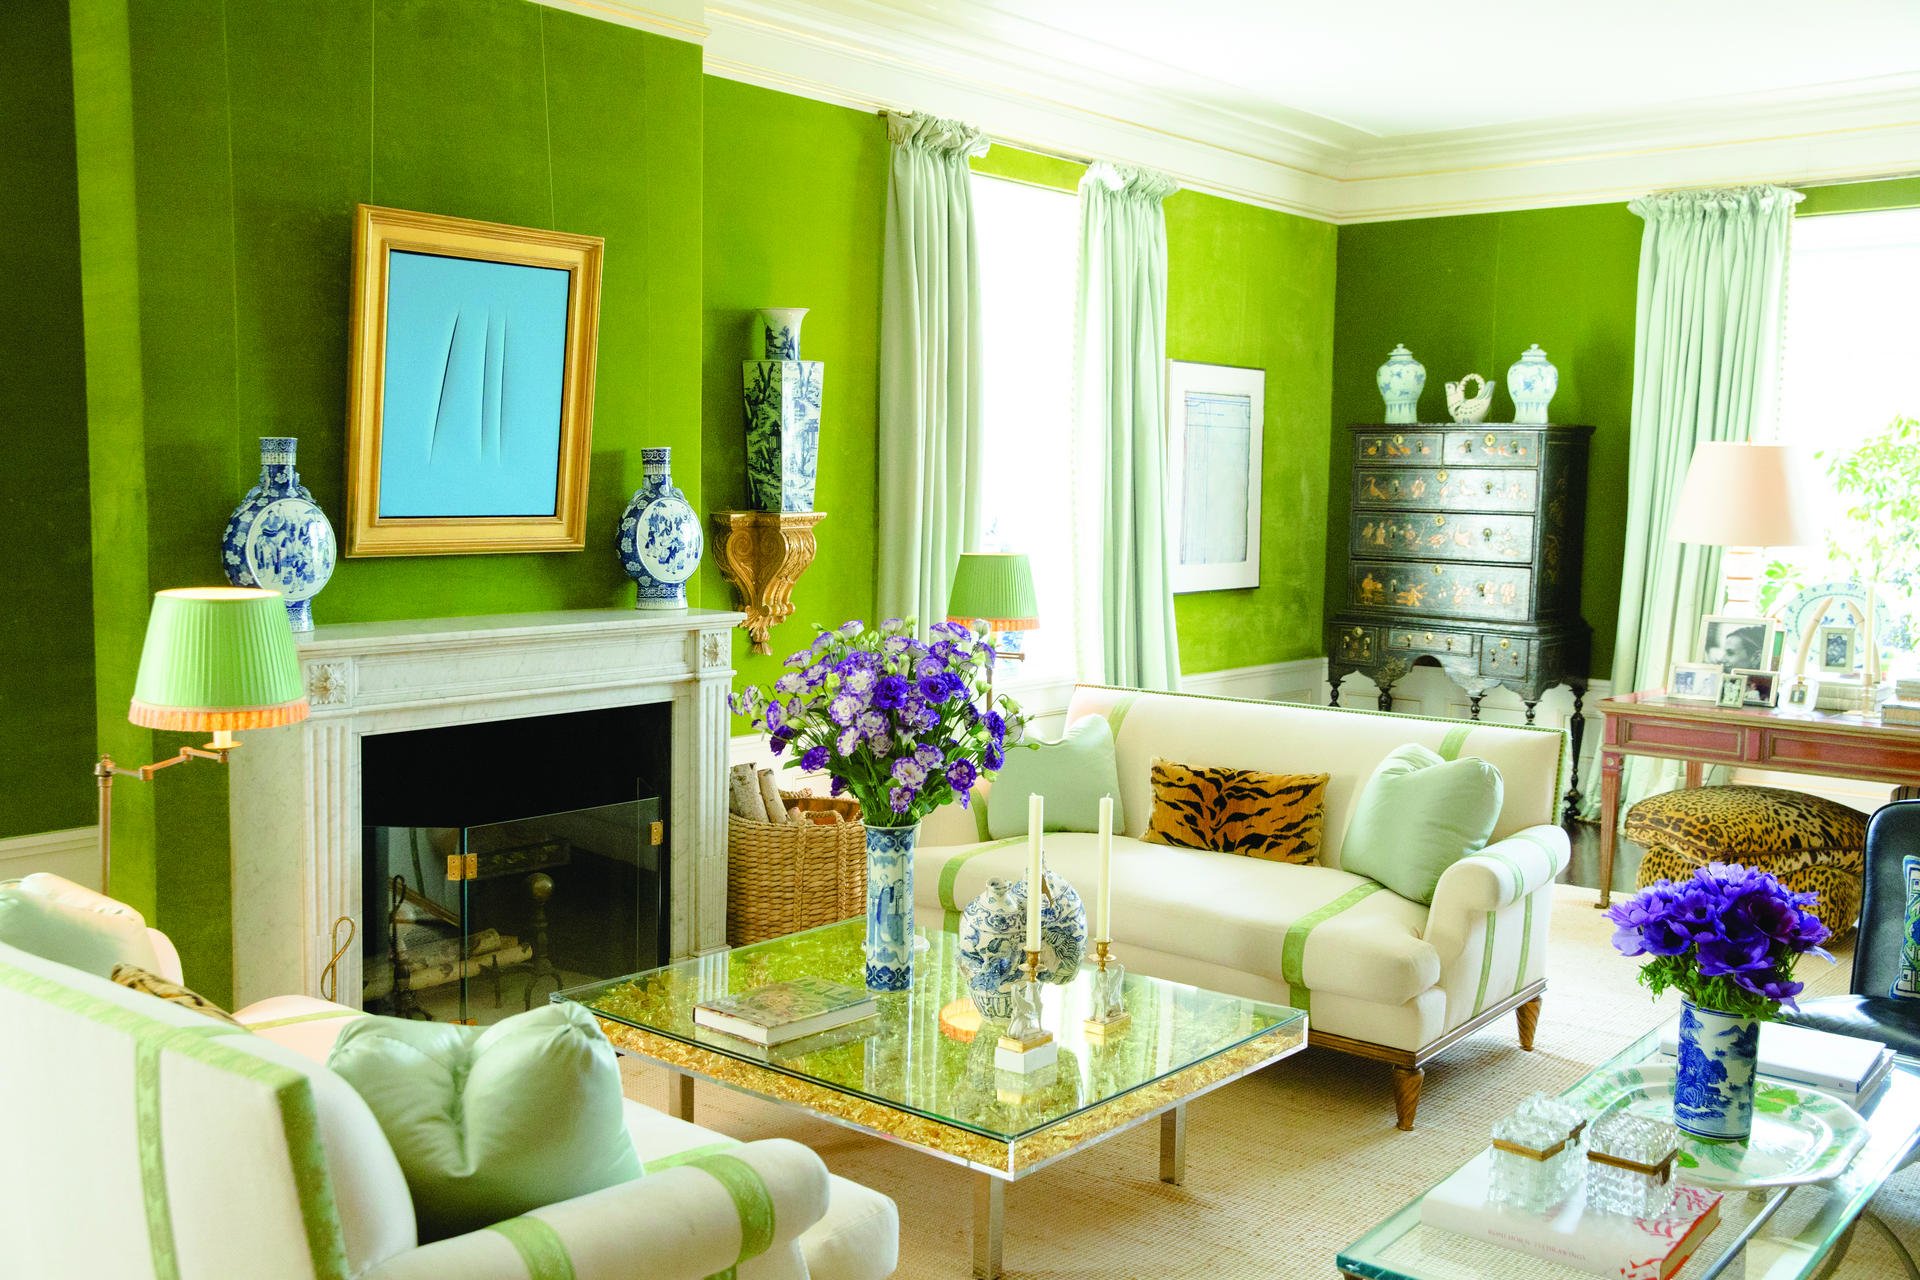 Valley Forge's Fashion Designer and Author Tory Burch Brings Color to Her  New York Home